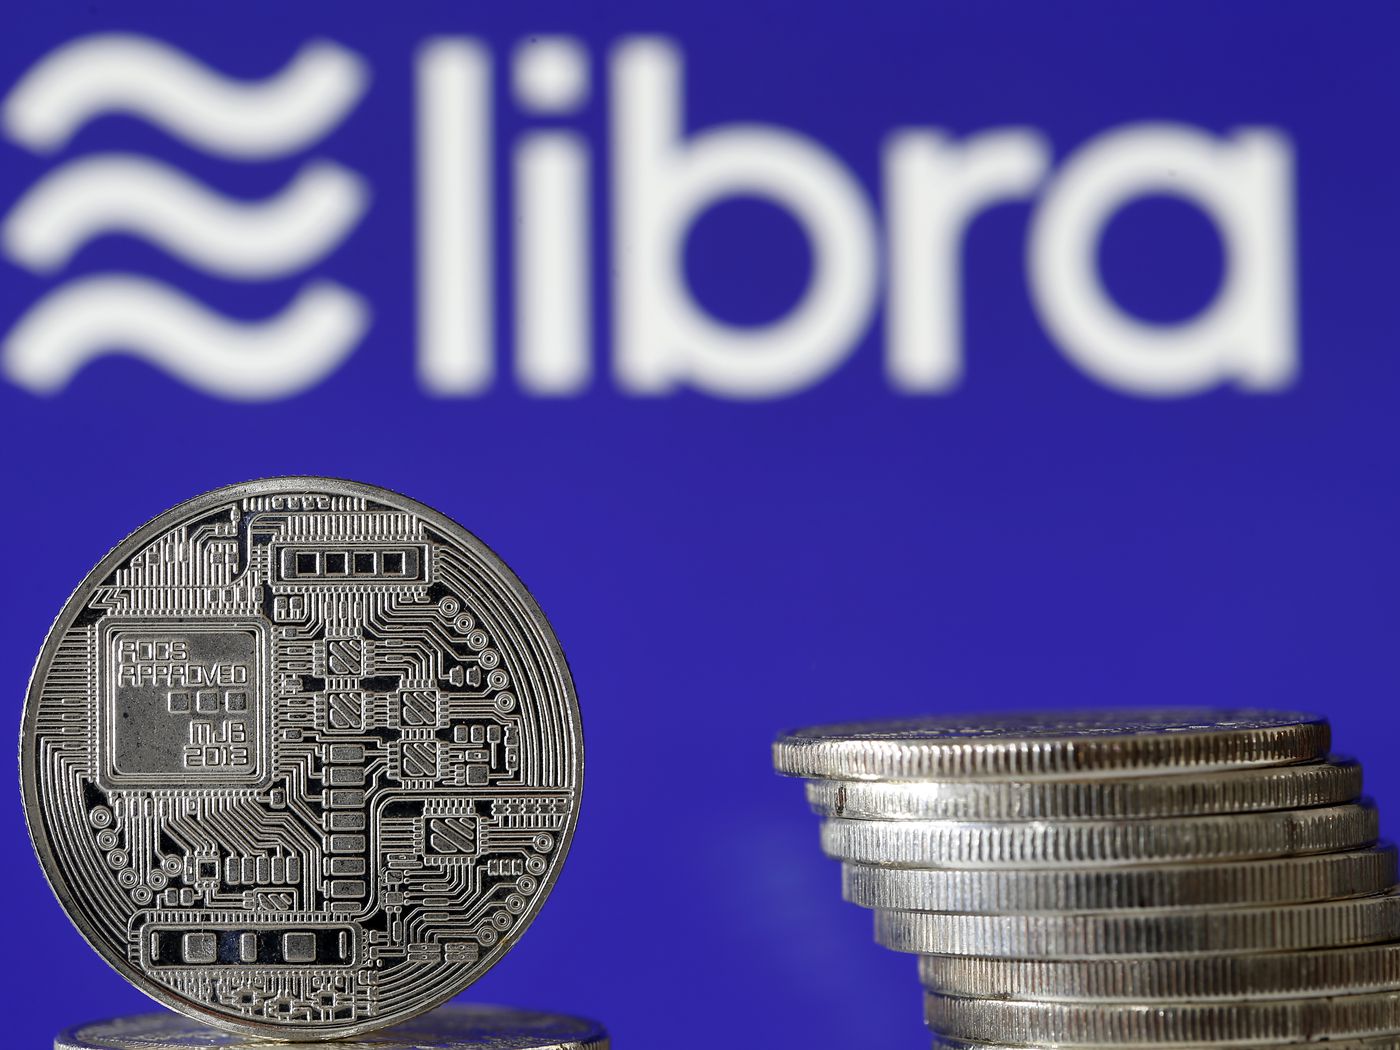 Facebook’s libra cryptocurrency: what you need to know - Vox